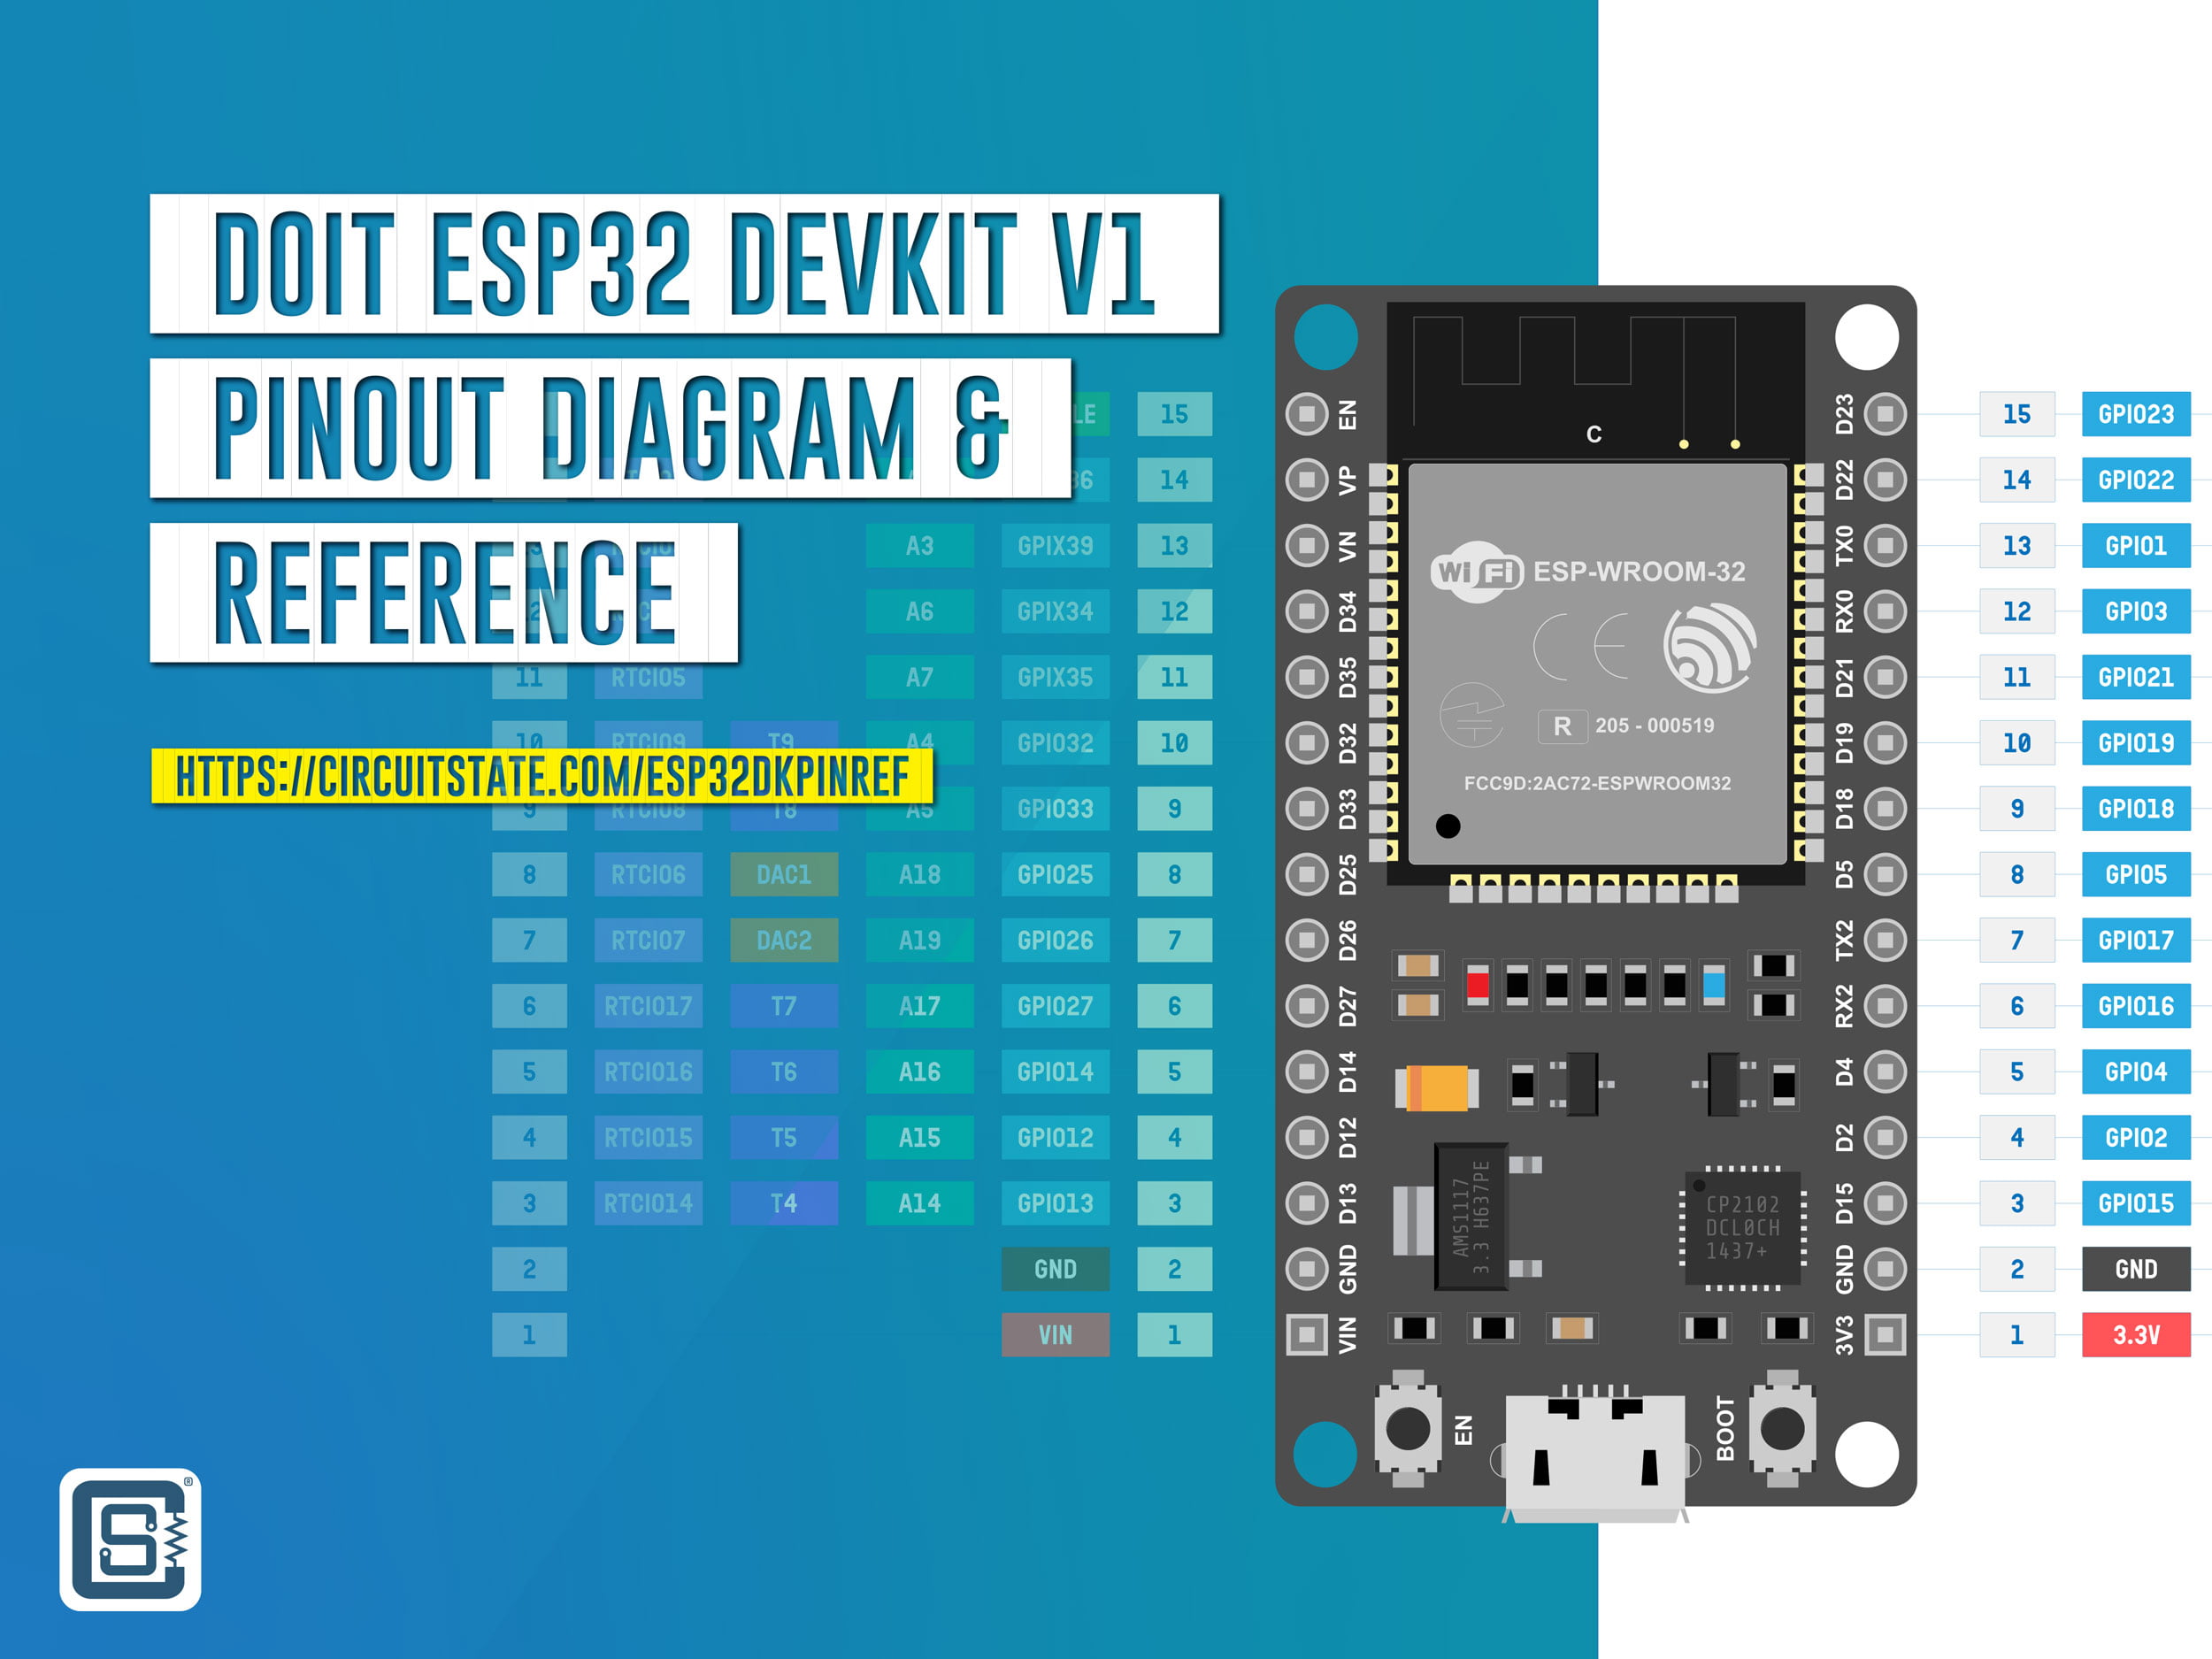 How to connect ESP32 Dev Kit V1 to ThingsBoard?